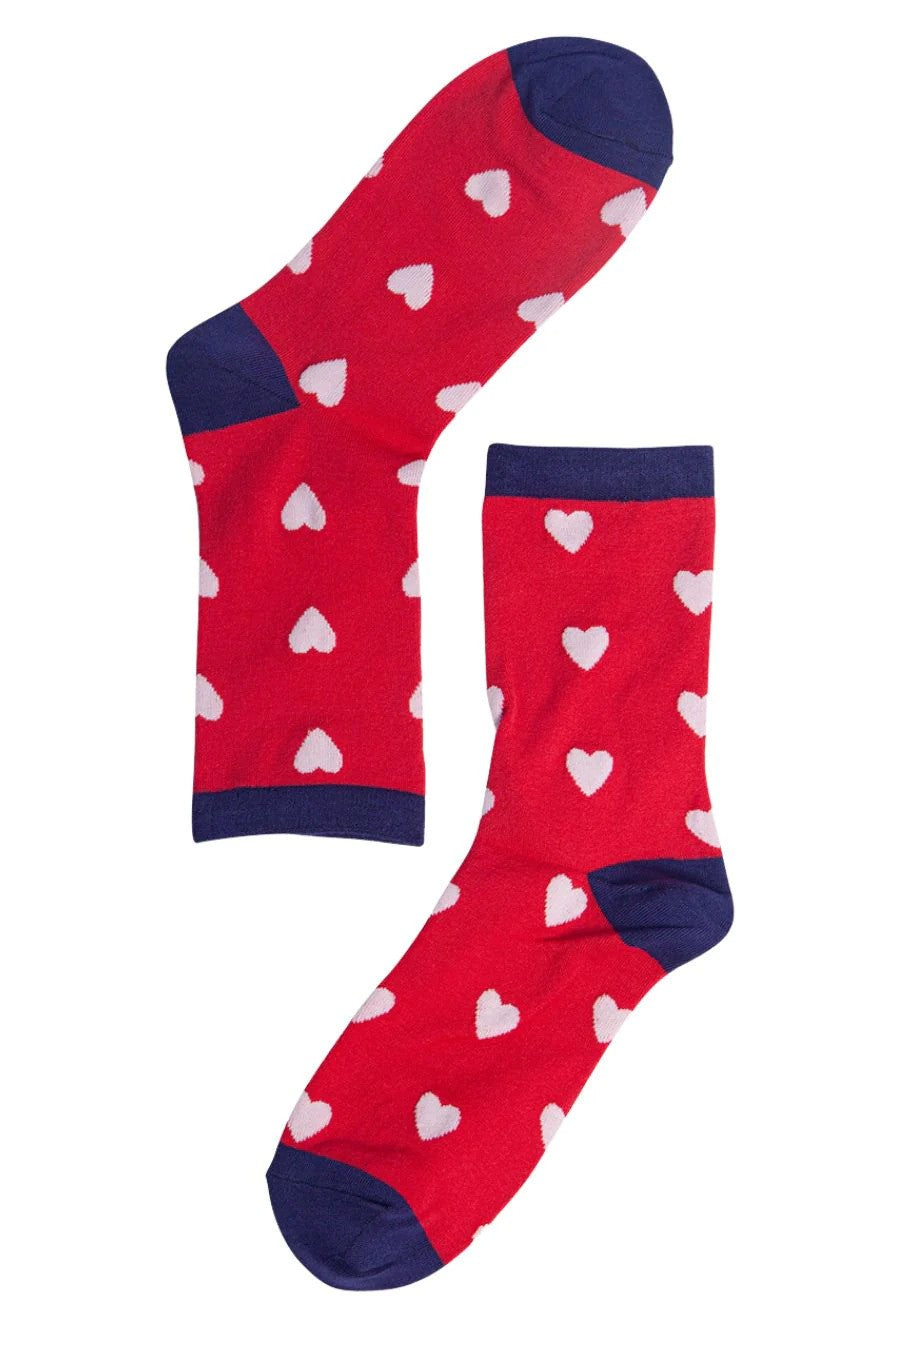 Red with White Hearts Bamboo Socks